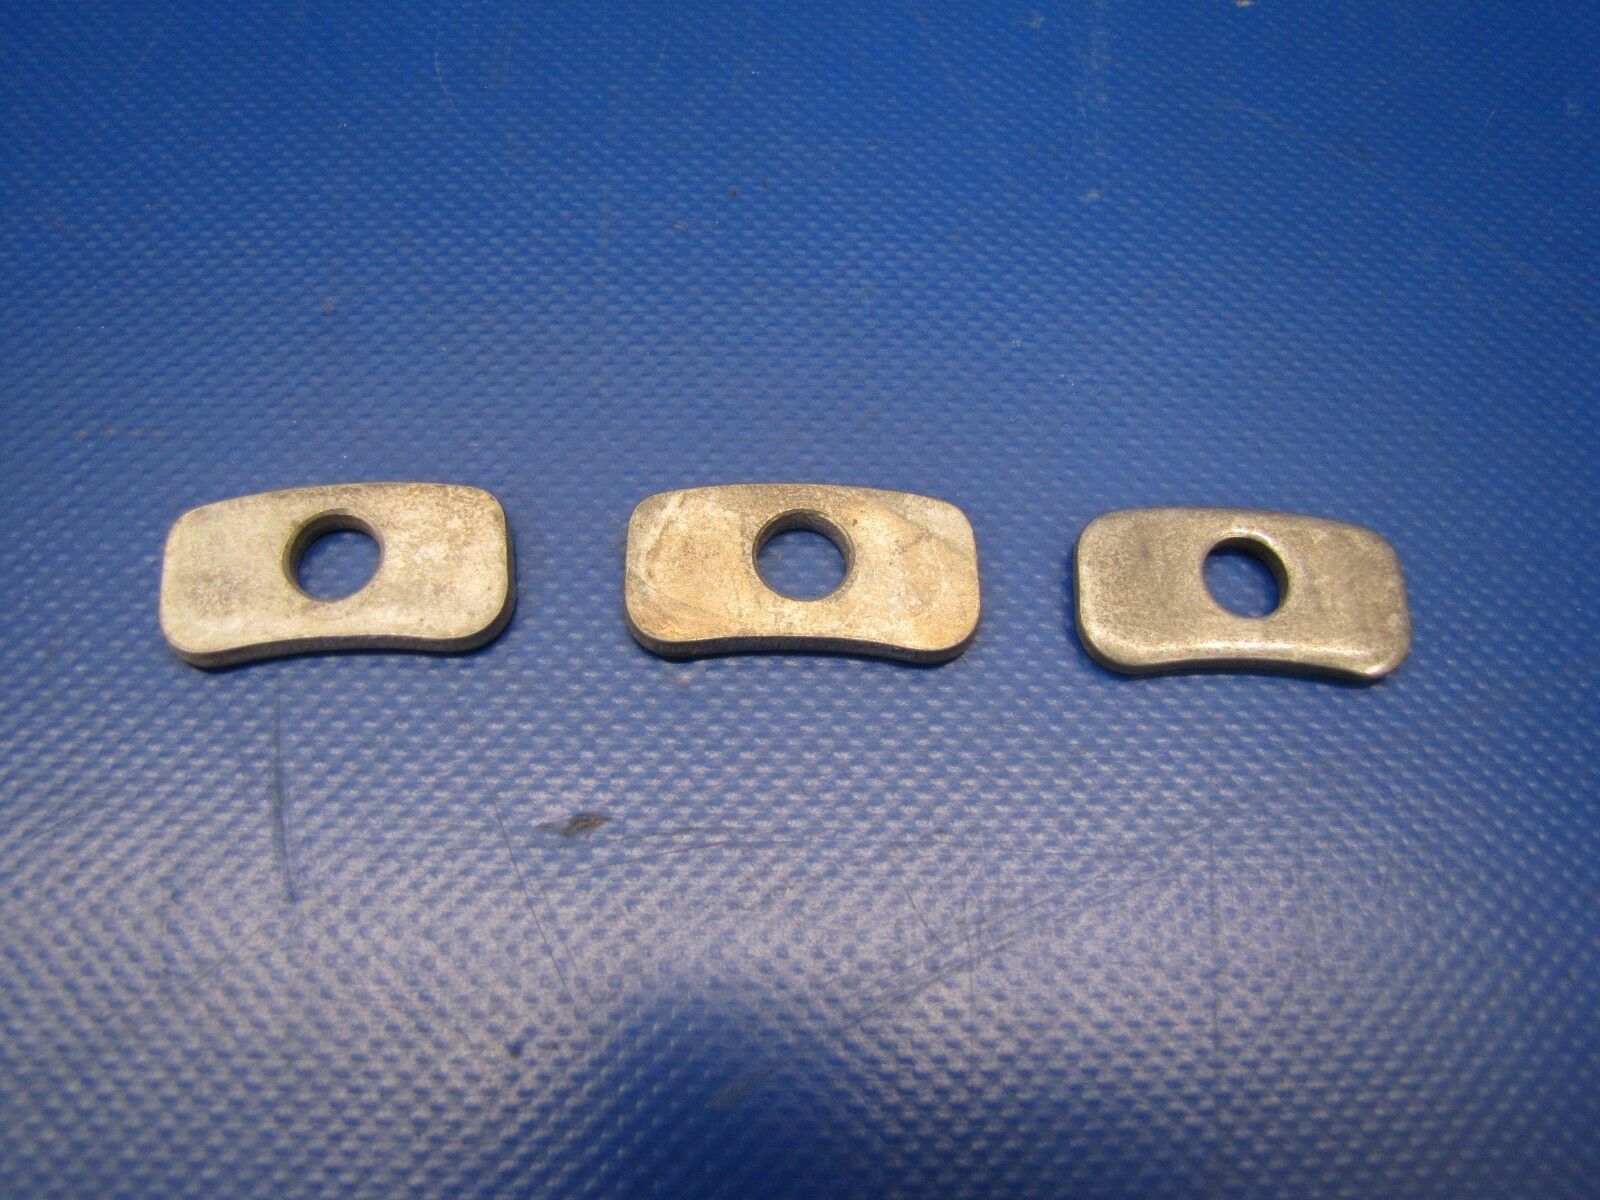 Cleveland Washer / Spacer P/N 95-8 & 095-00800 NOS LOT OF 3 (0517-113)